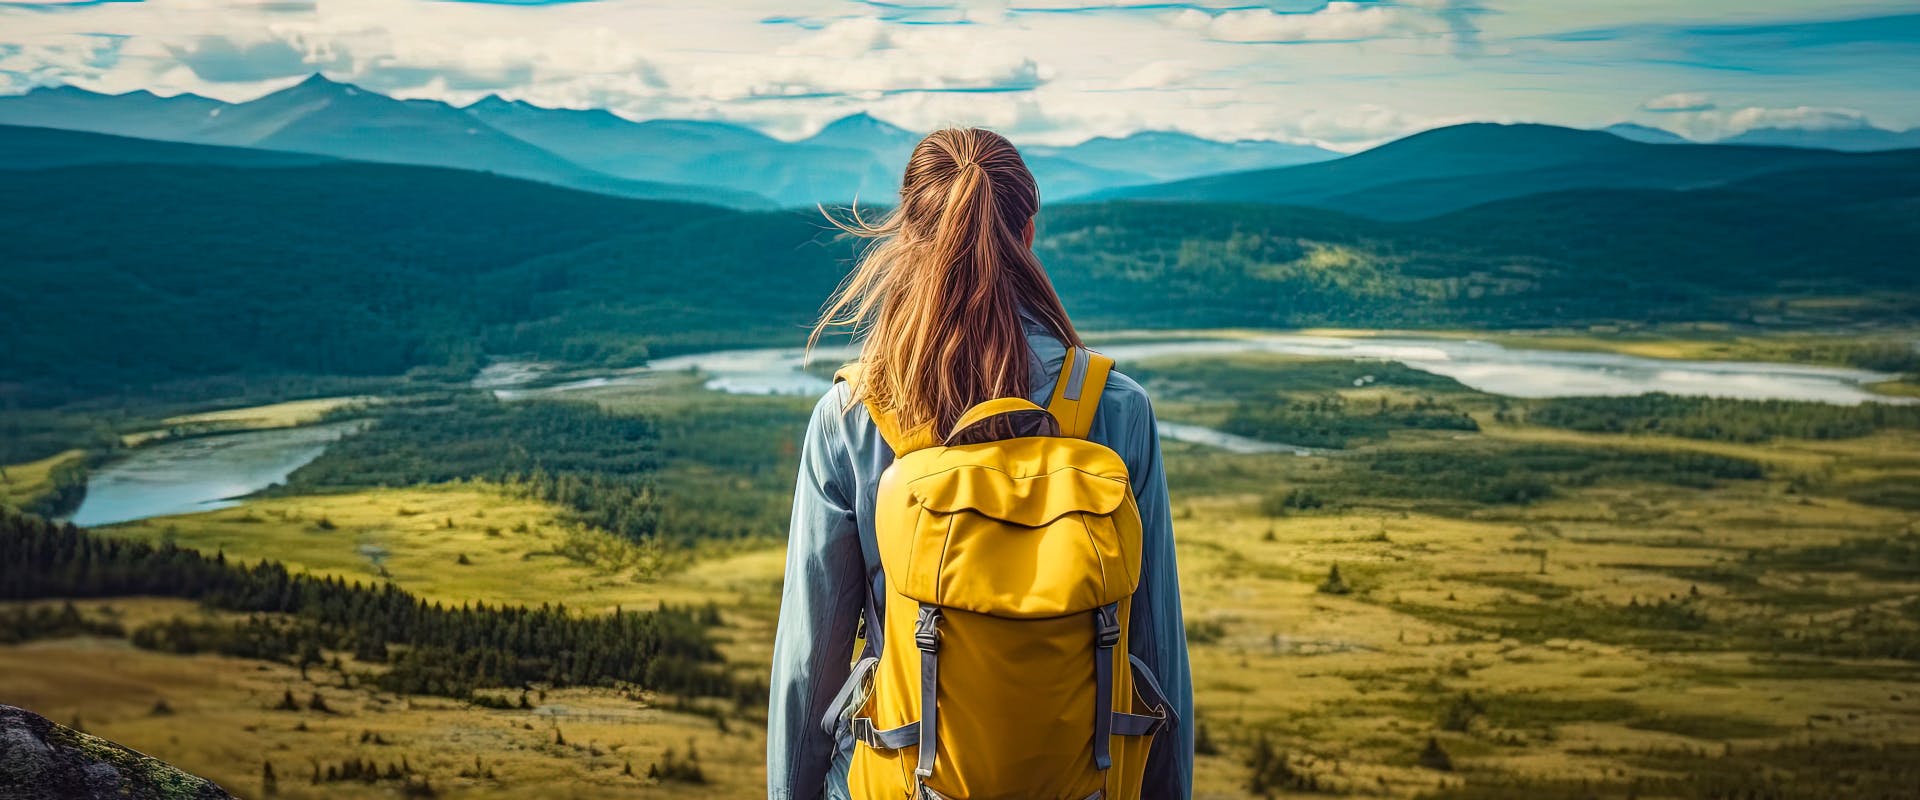 Solo Hiking: 9 Hiking Tips for Female Travelers